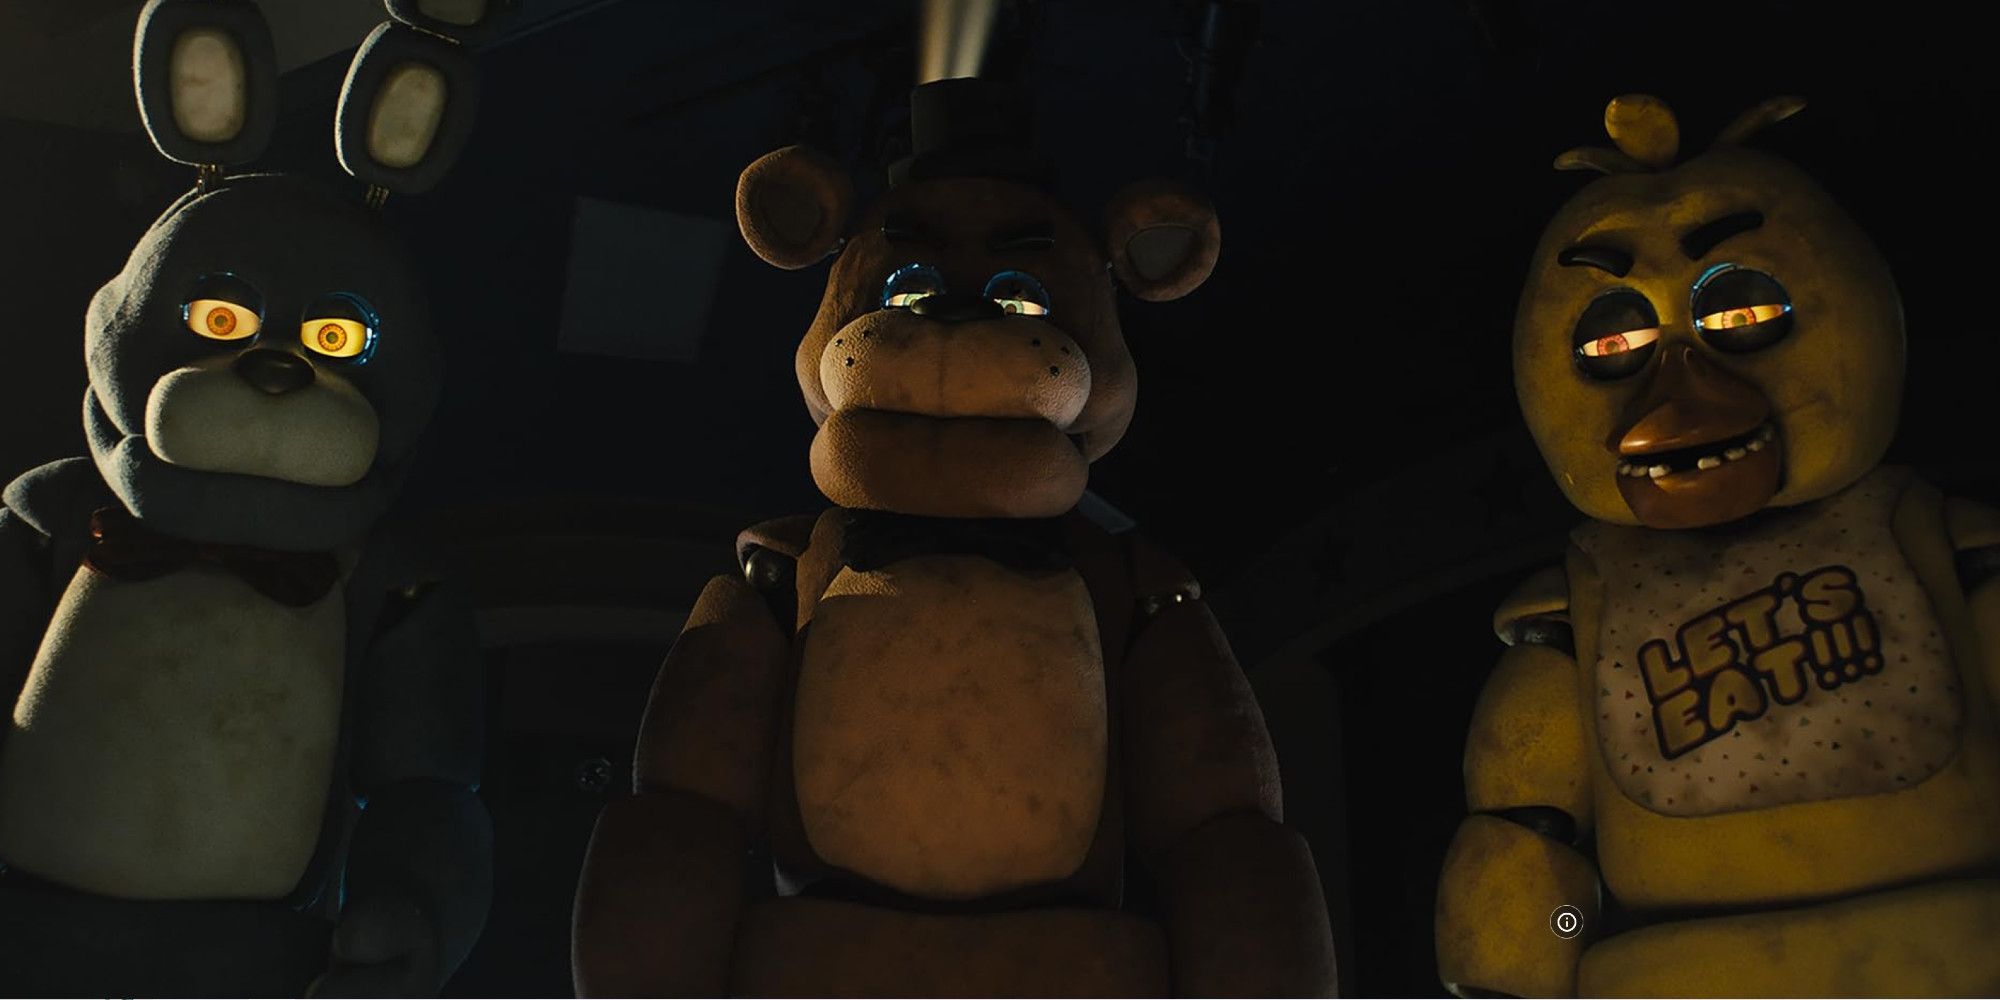 Bonnie, Chika, and Freddy in a dark room looking down at someone in the Five Nights at Freddy's movie